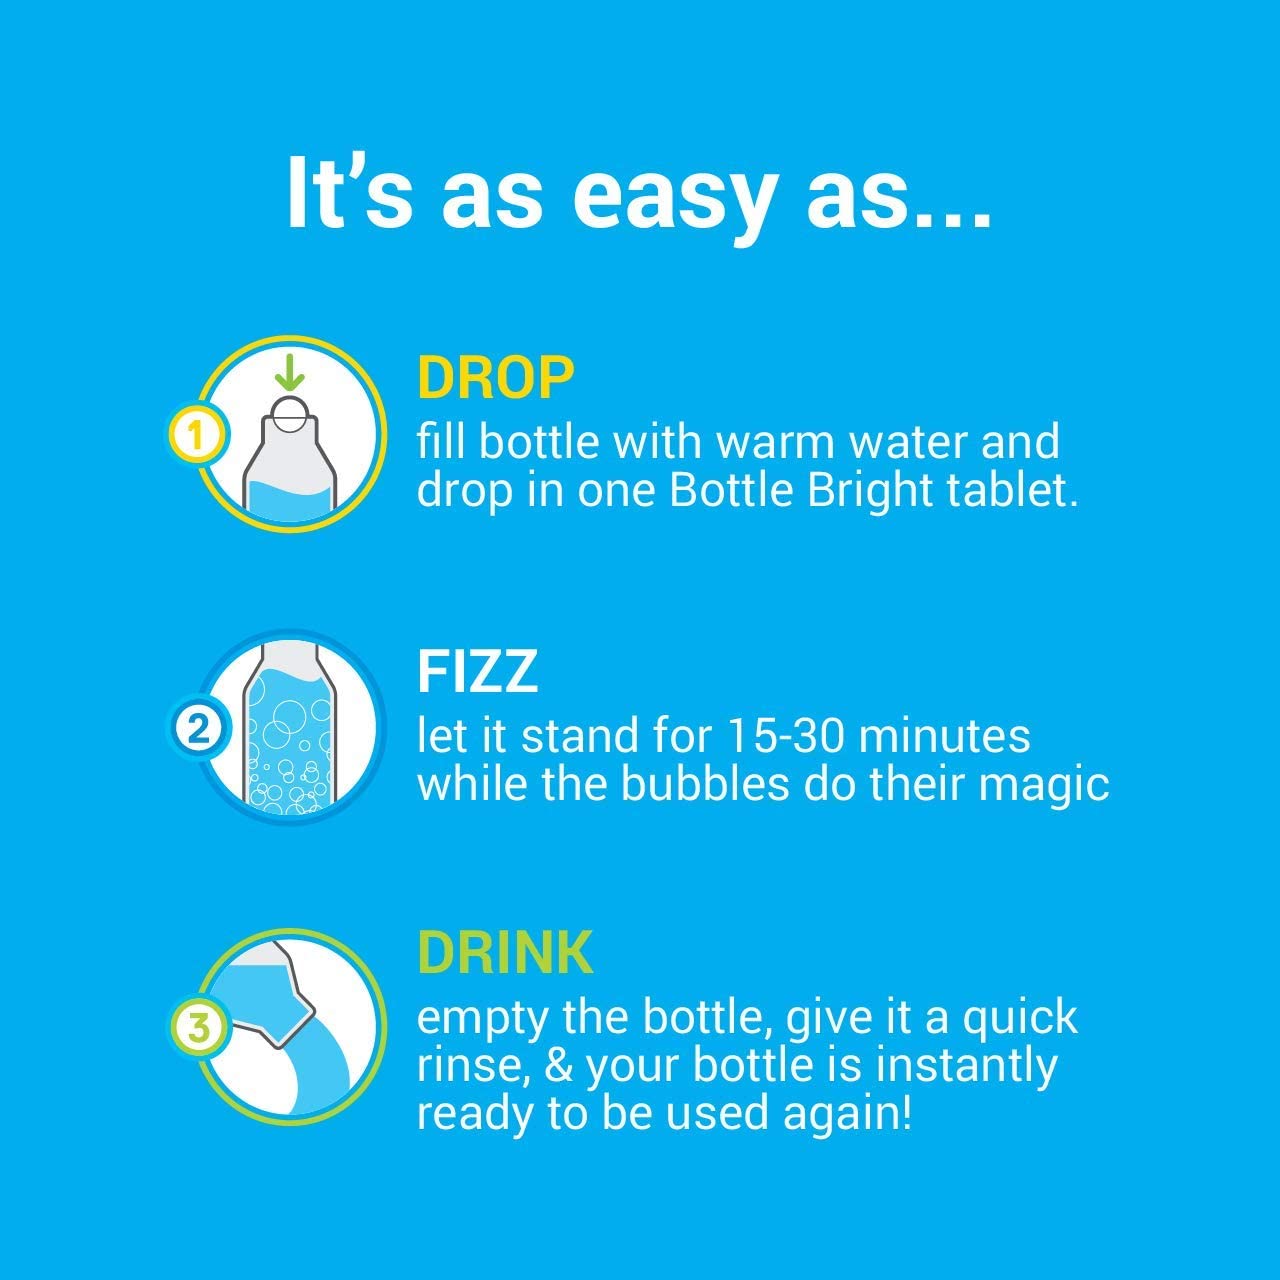 Instructions for using: drop, fizz, drink